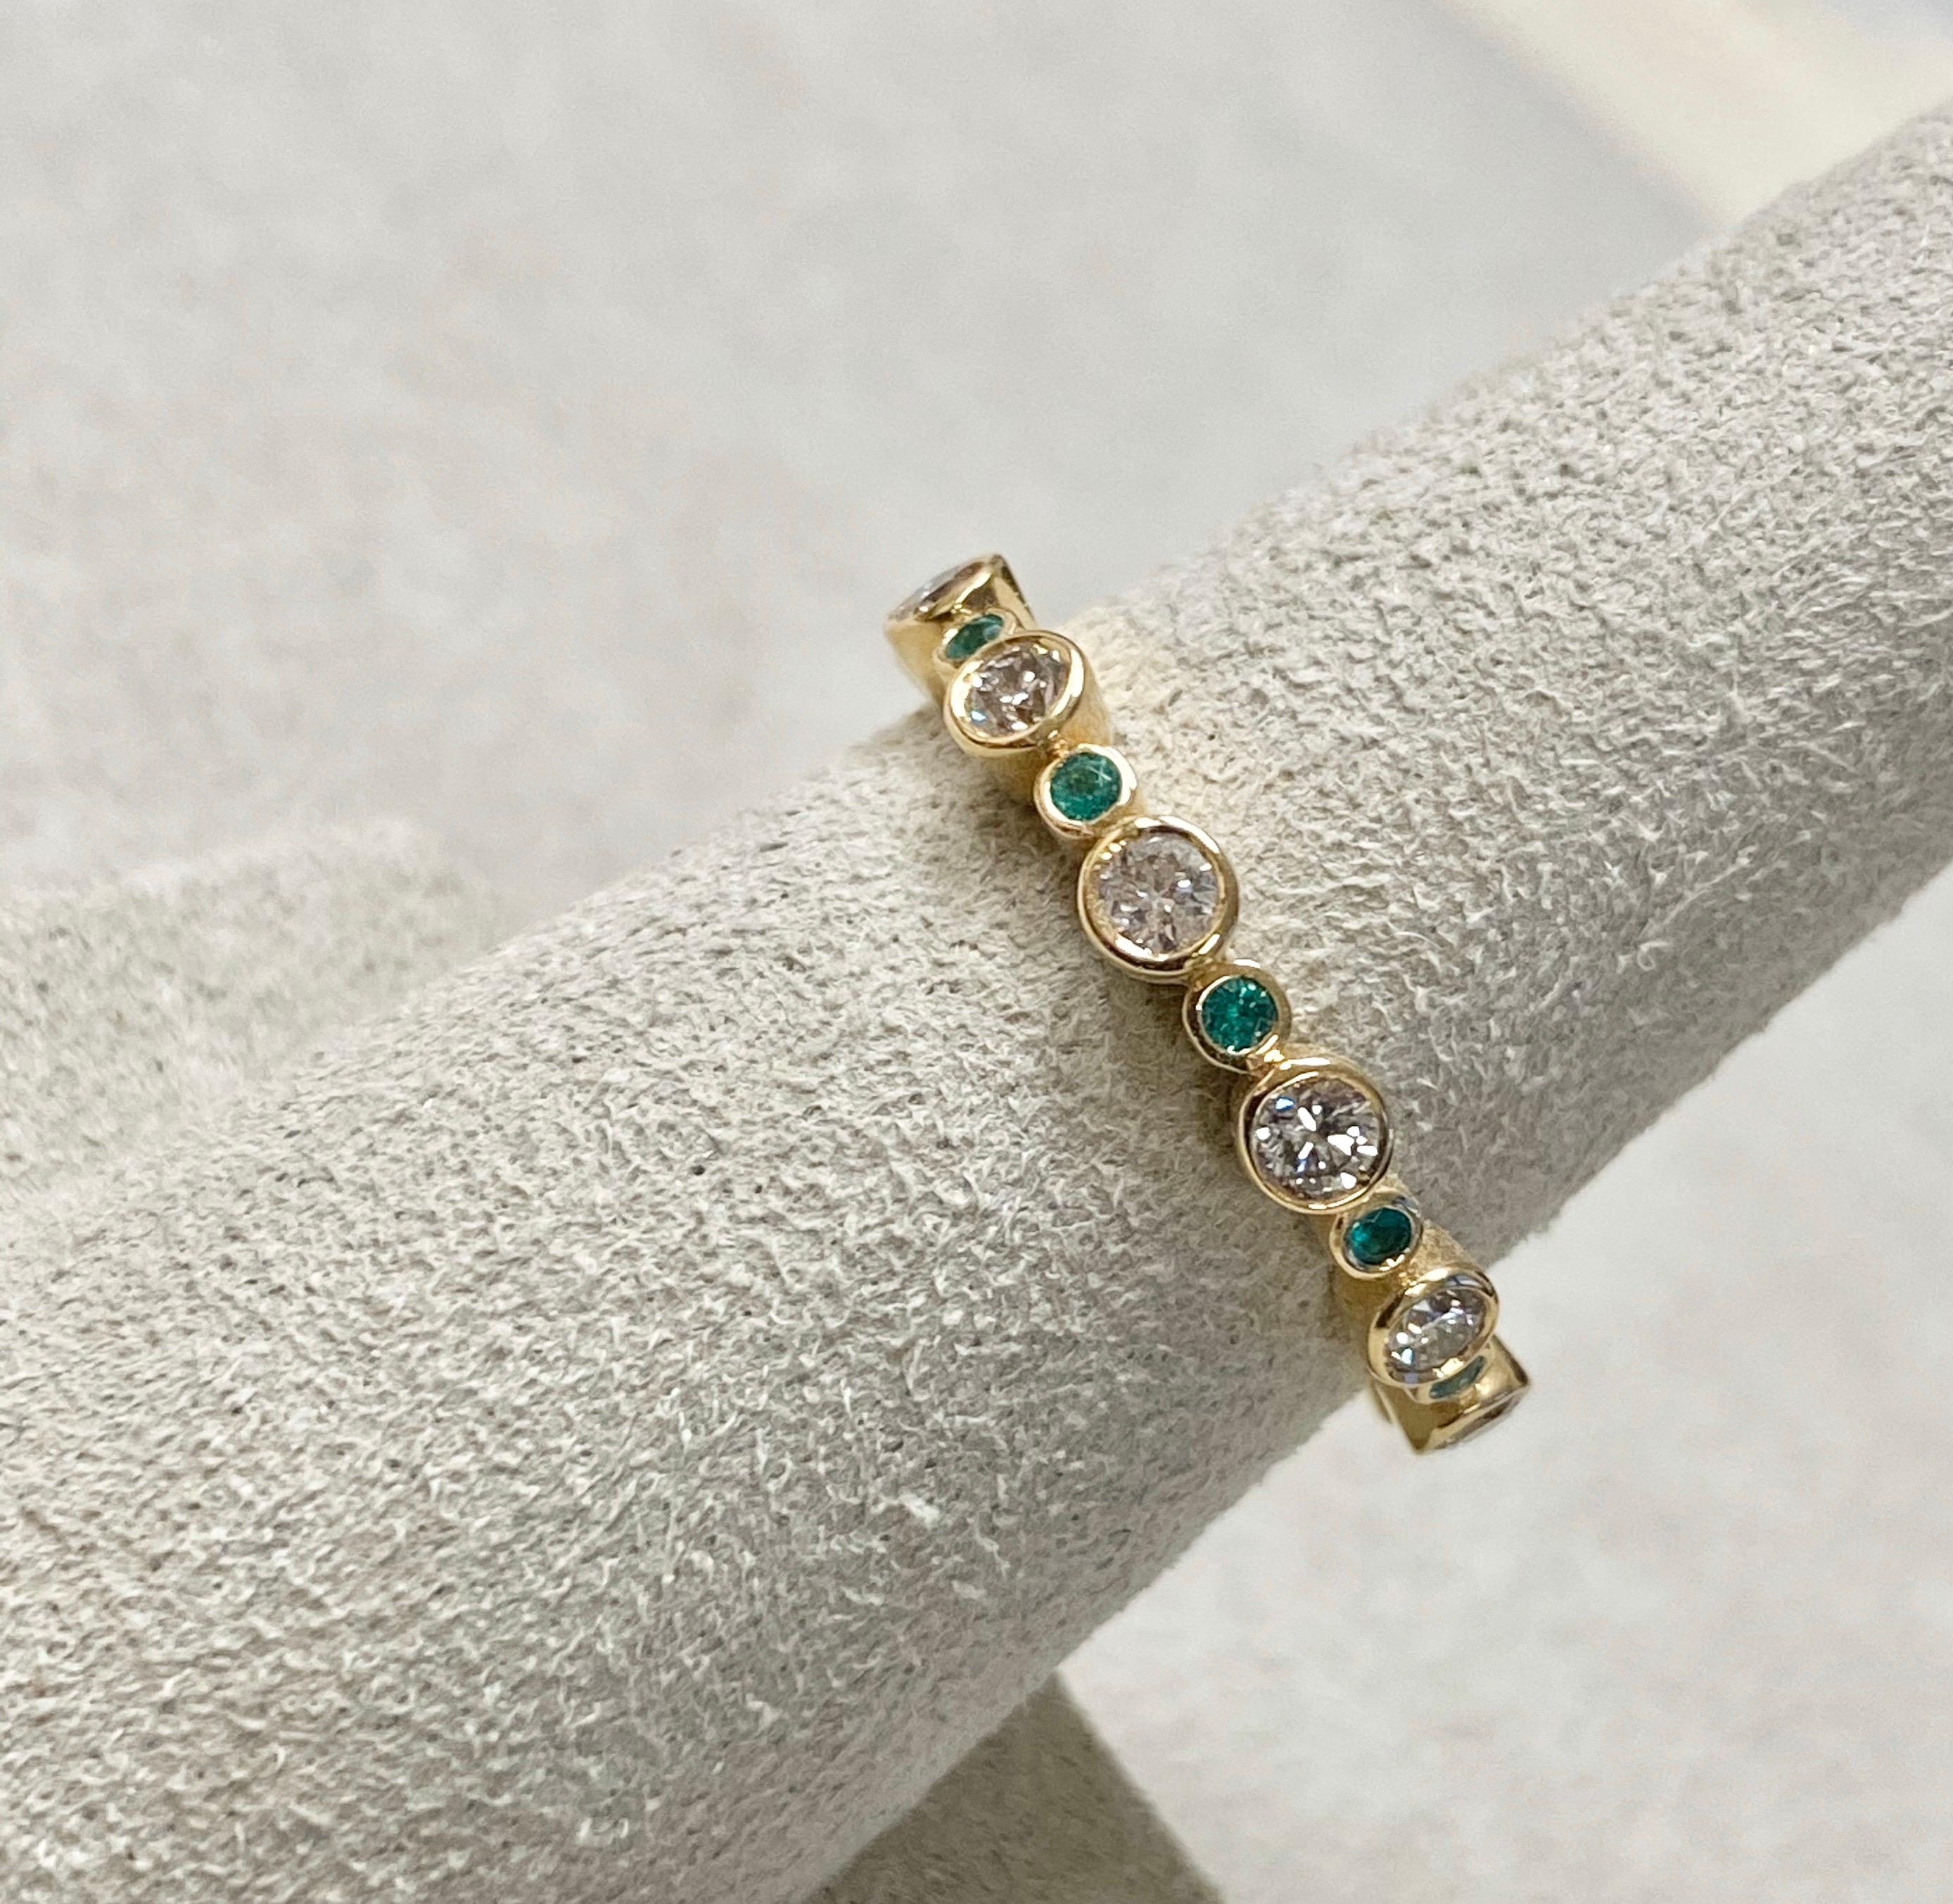 Created in 18 karat yellow gold
Diamonds 0.50 ct approx
Emeralds 0.15 cts approx
Ring size US 6.5, Can be made in other ring sizes on special order

Elegantly crafted in 18 karat yellow gold, this ring is adorned with 0.50 carats of diamonds and